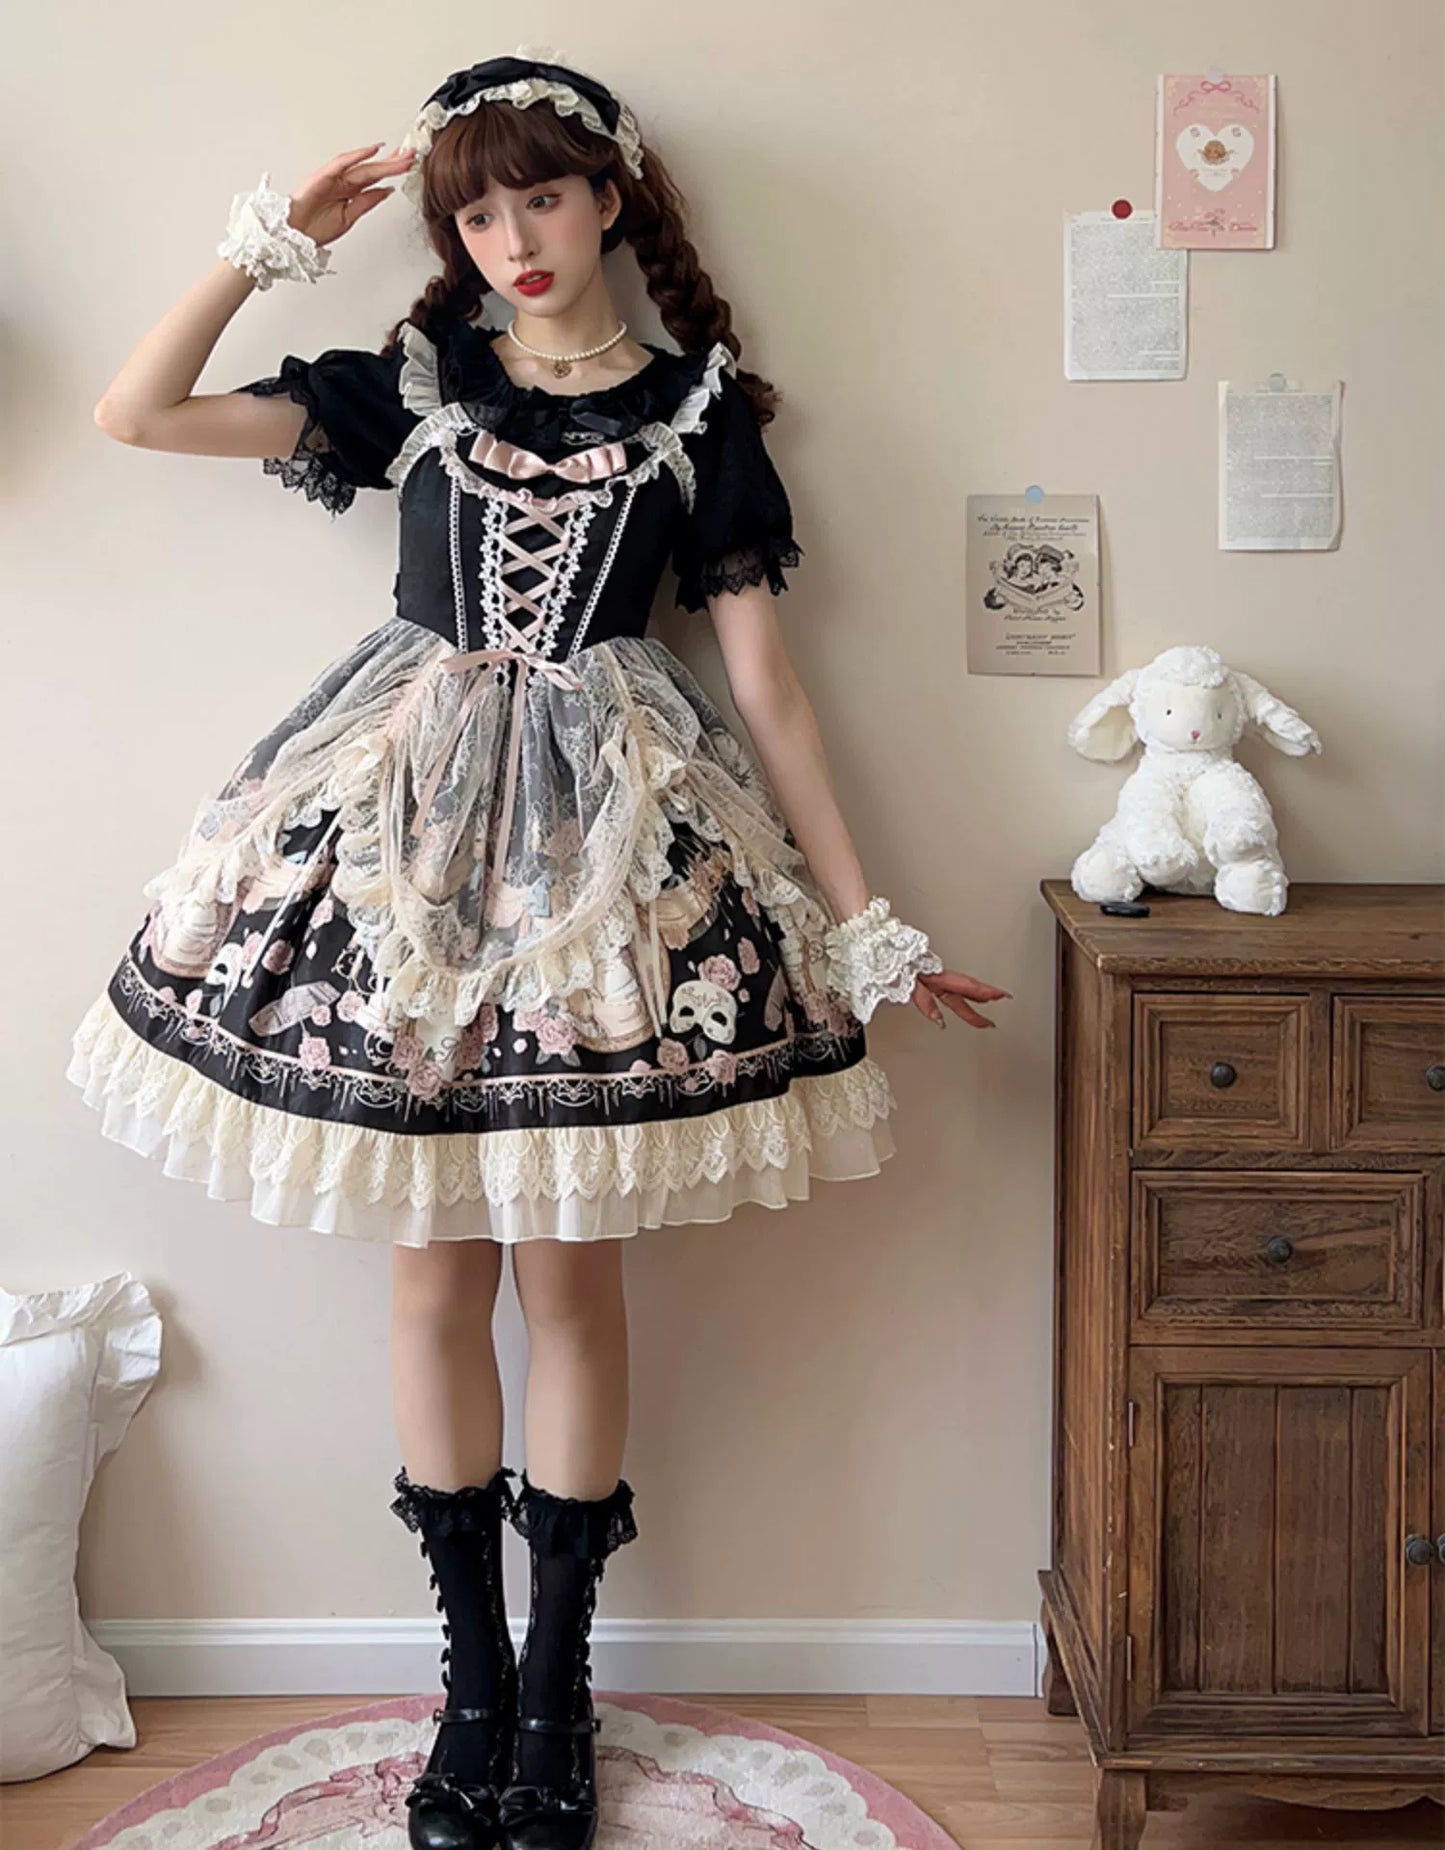 Prologue Rose and frilly jumper skirt